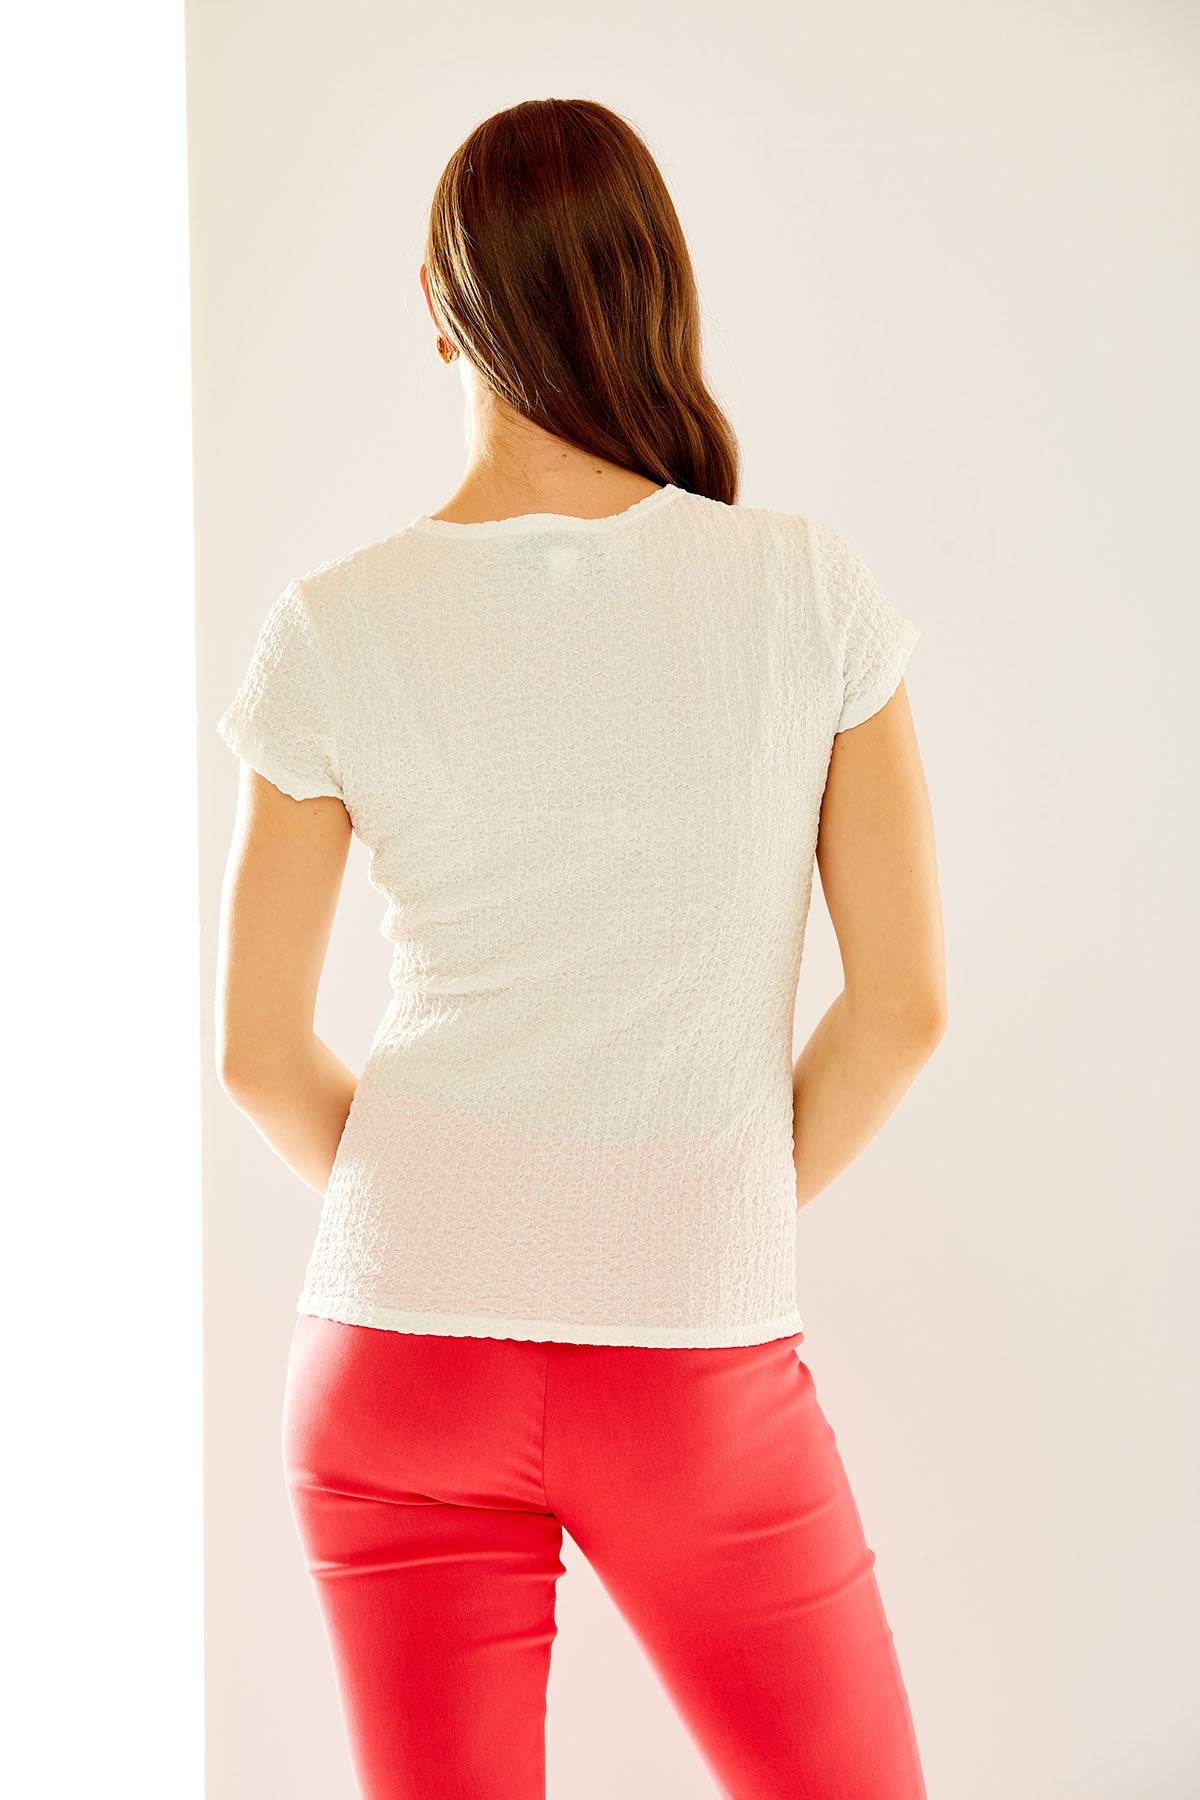 Woman in white textured knit tee